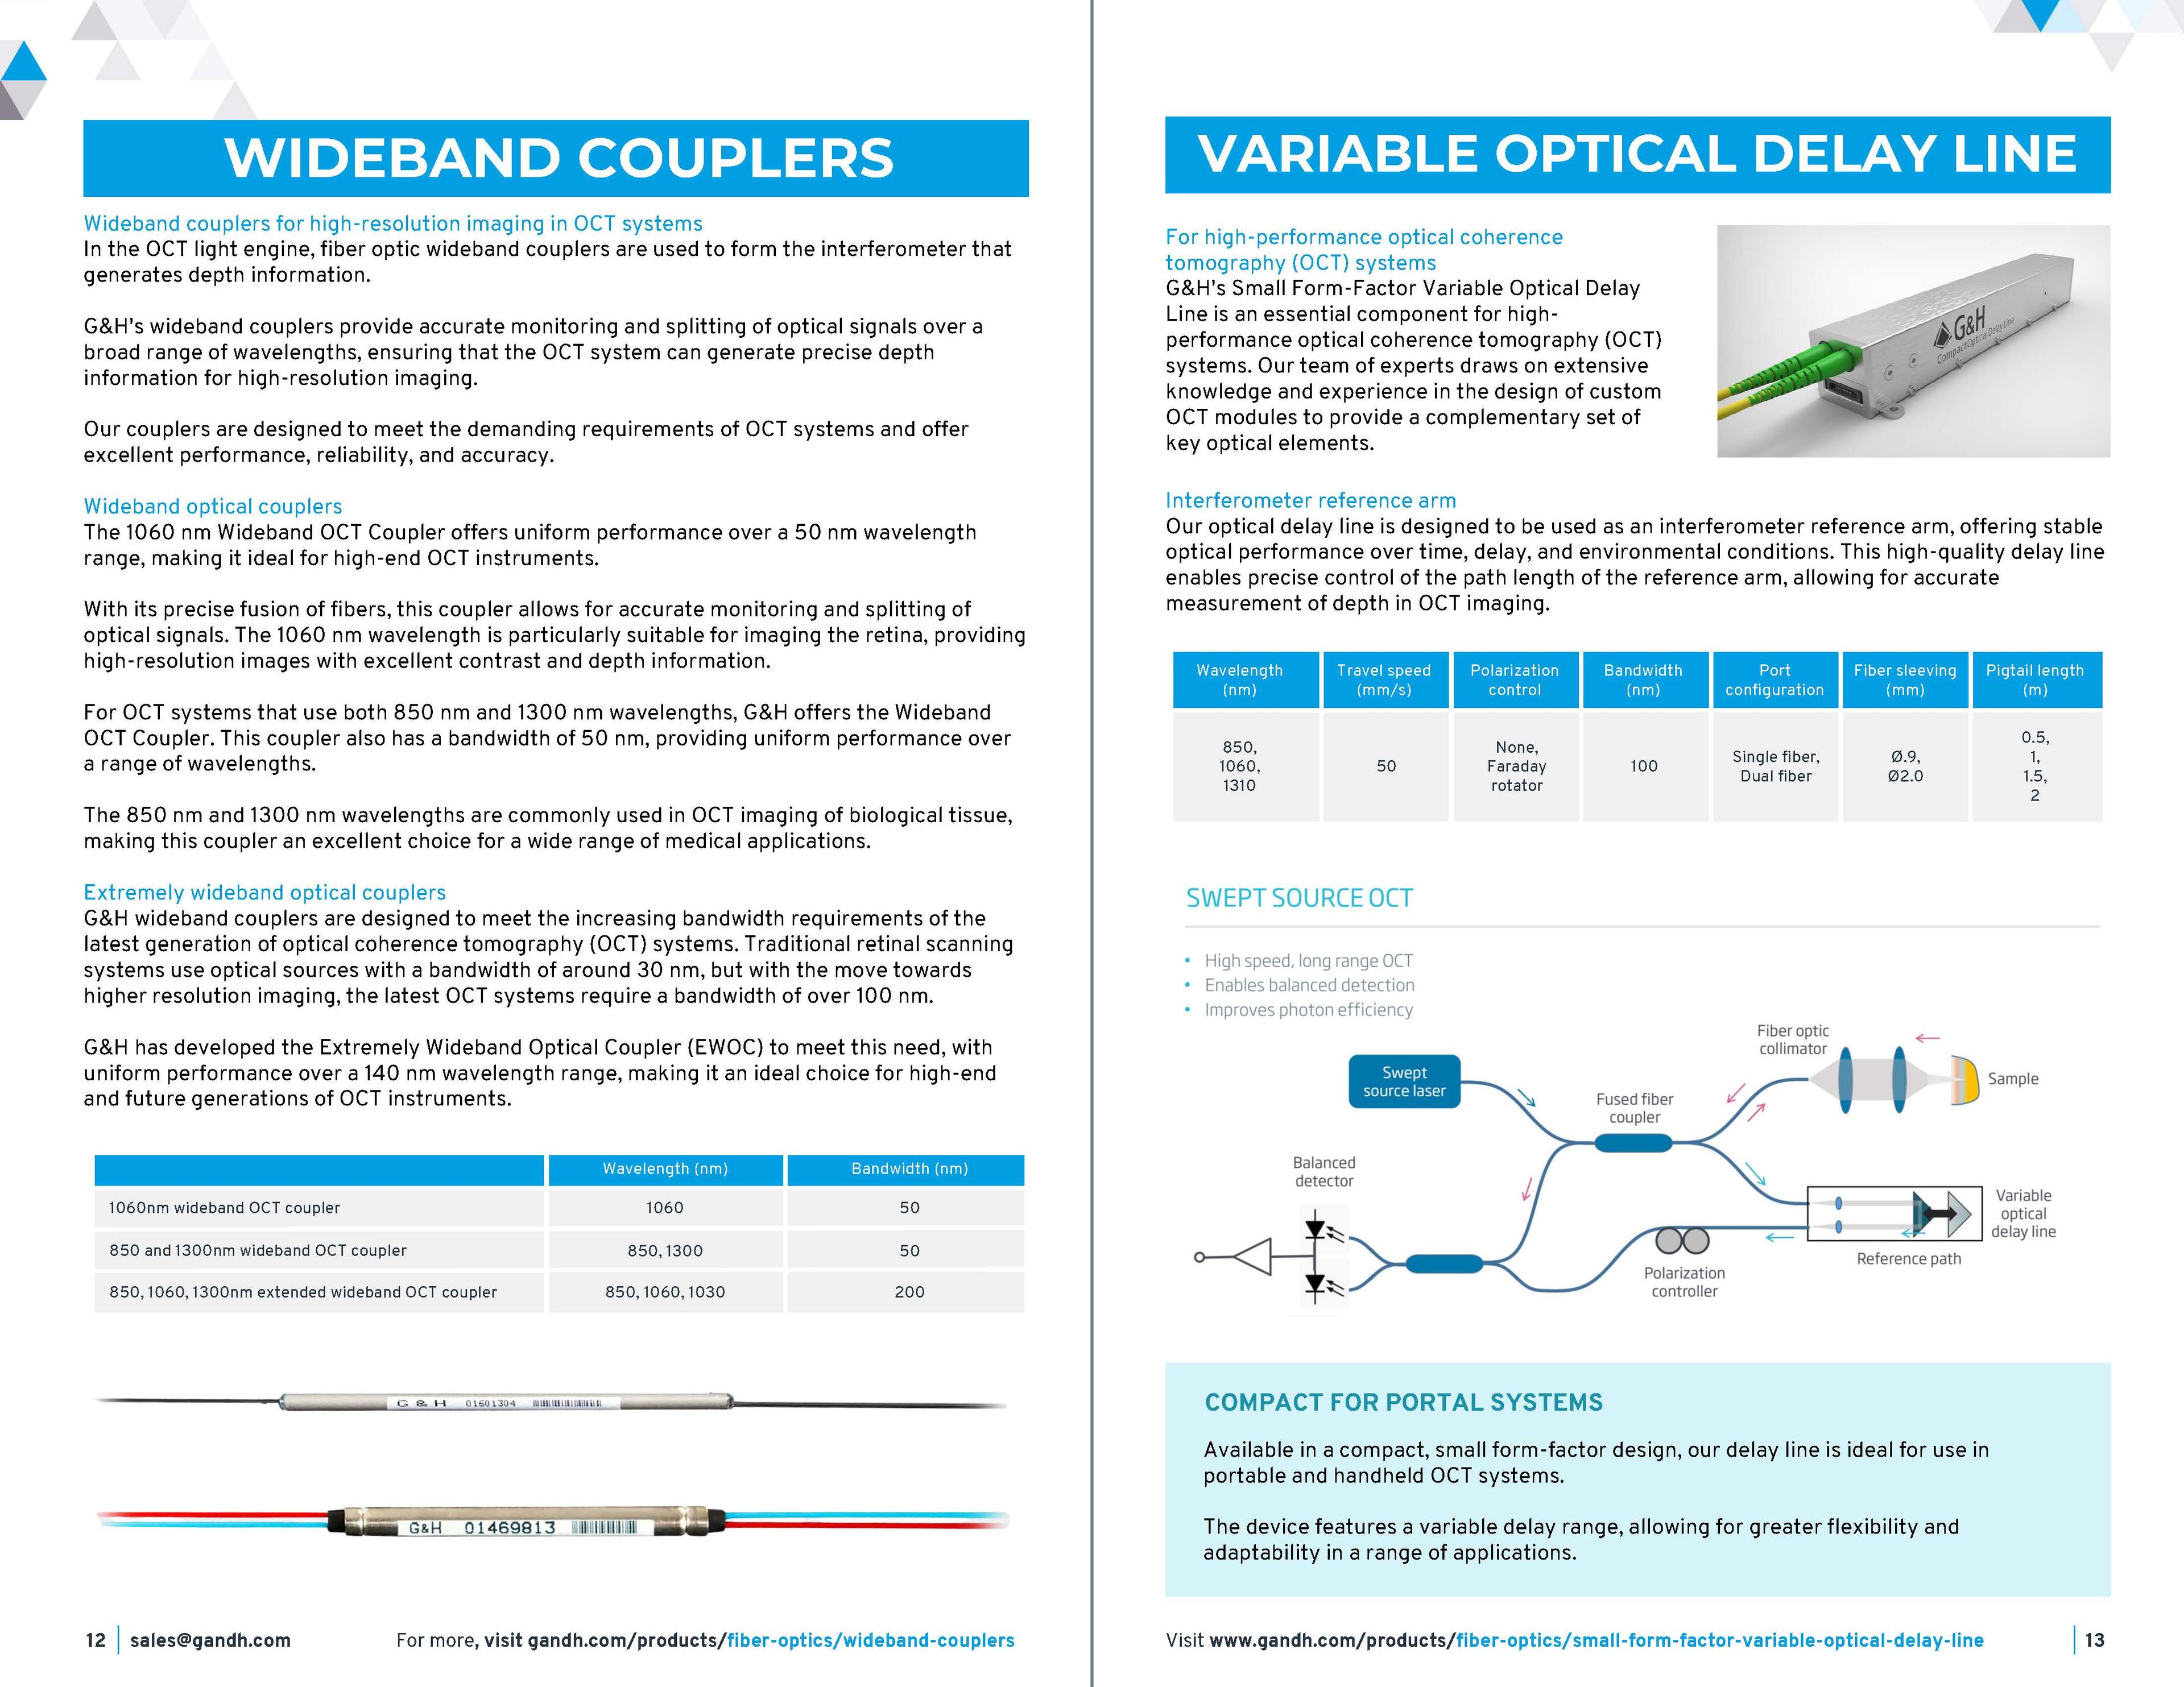 G&H Product & Solutions Guide - Fiber Optics Page 12-13